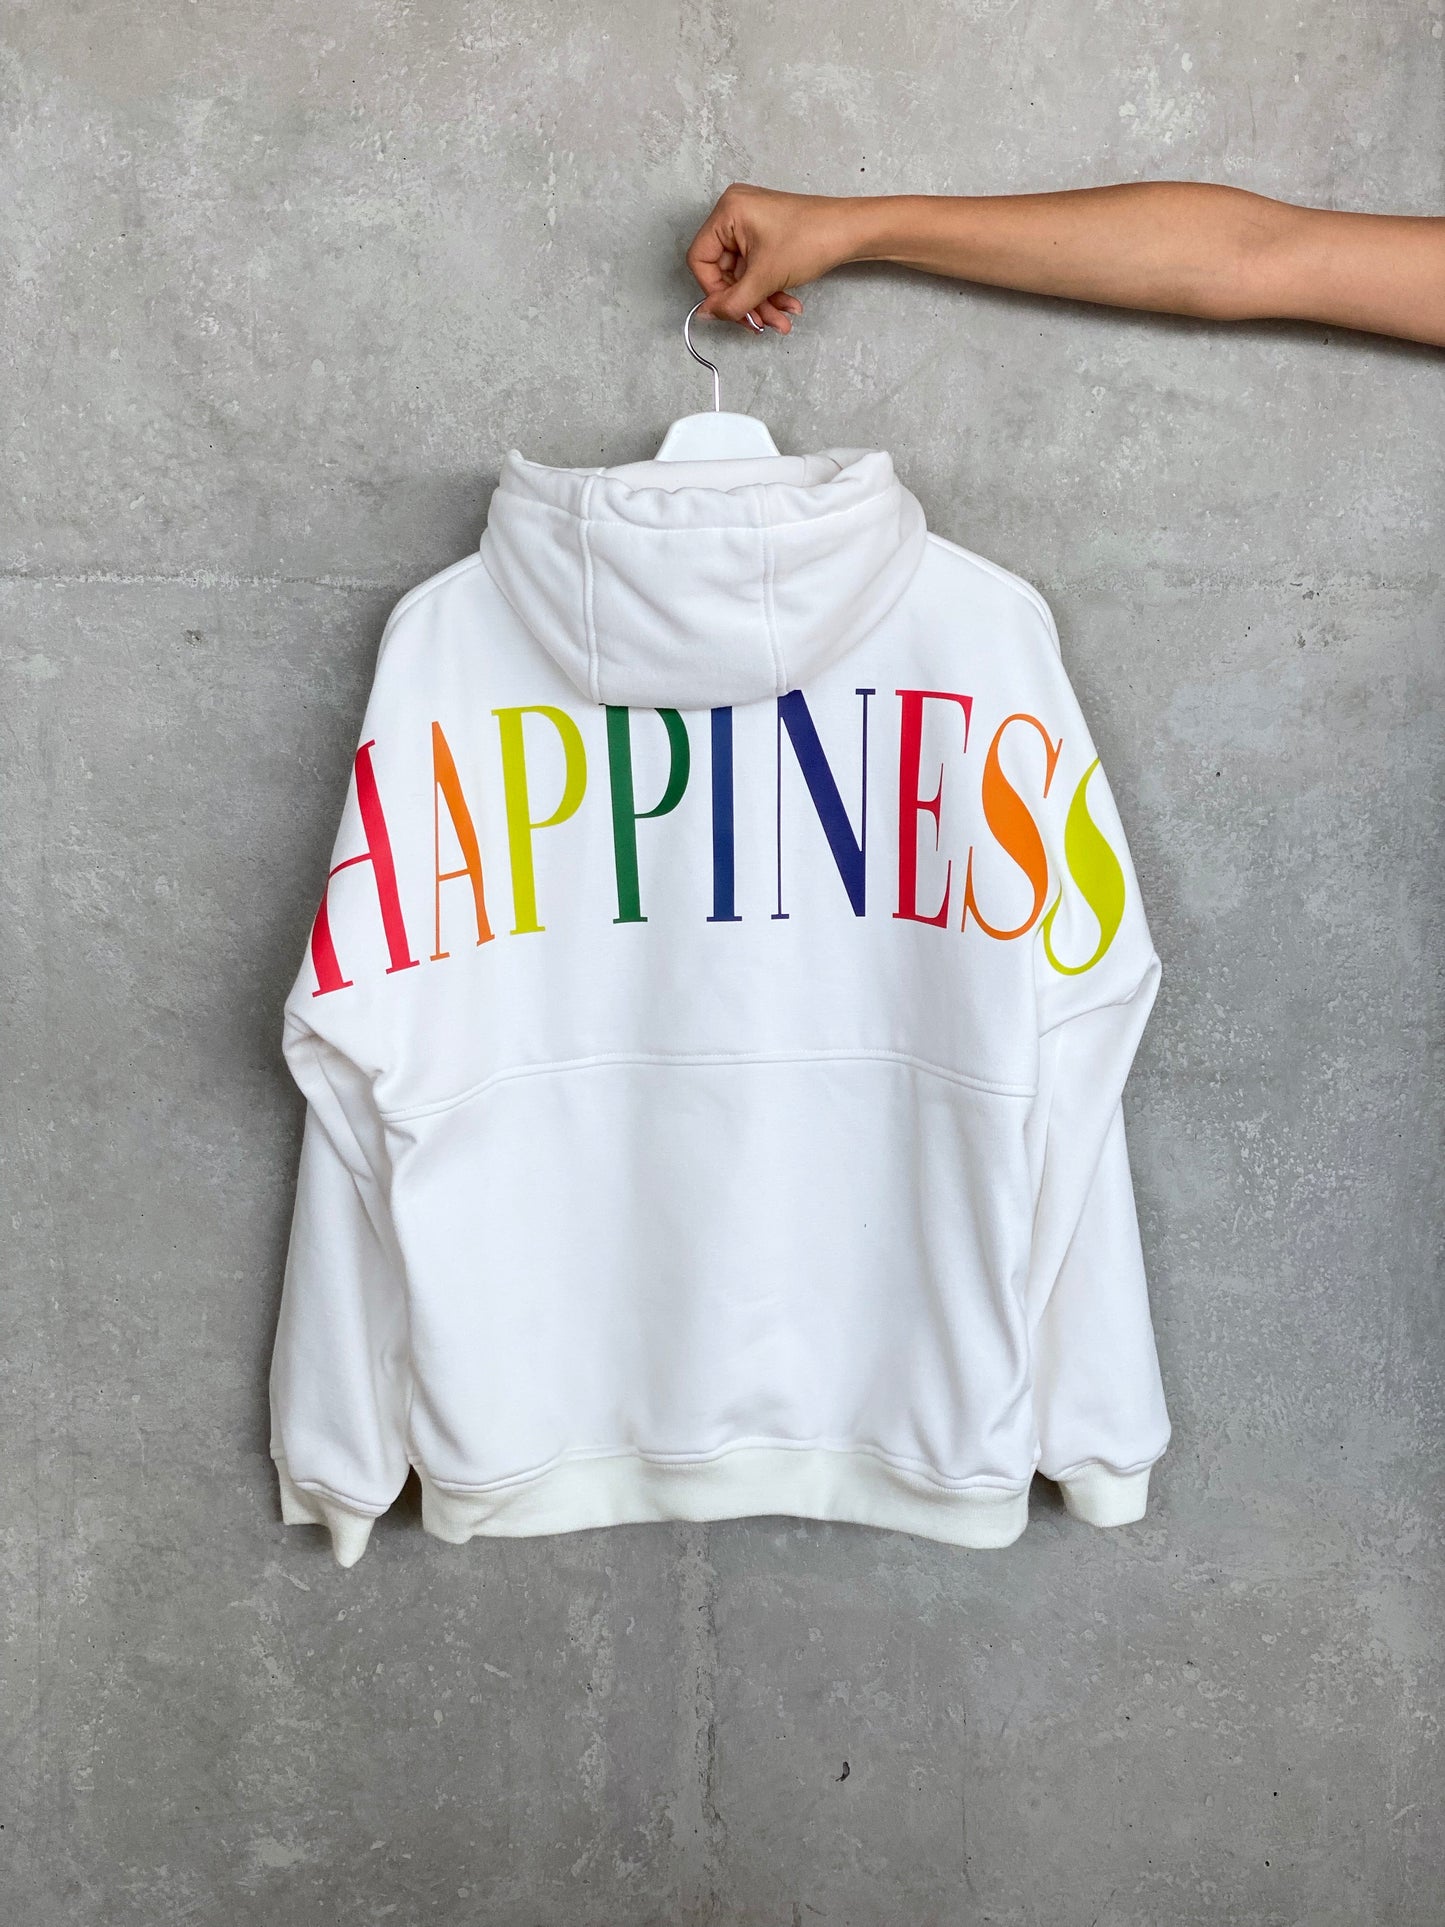 Perfecto Imperfecto Hoodie Happiness #22 Talla S/M